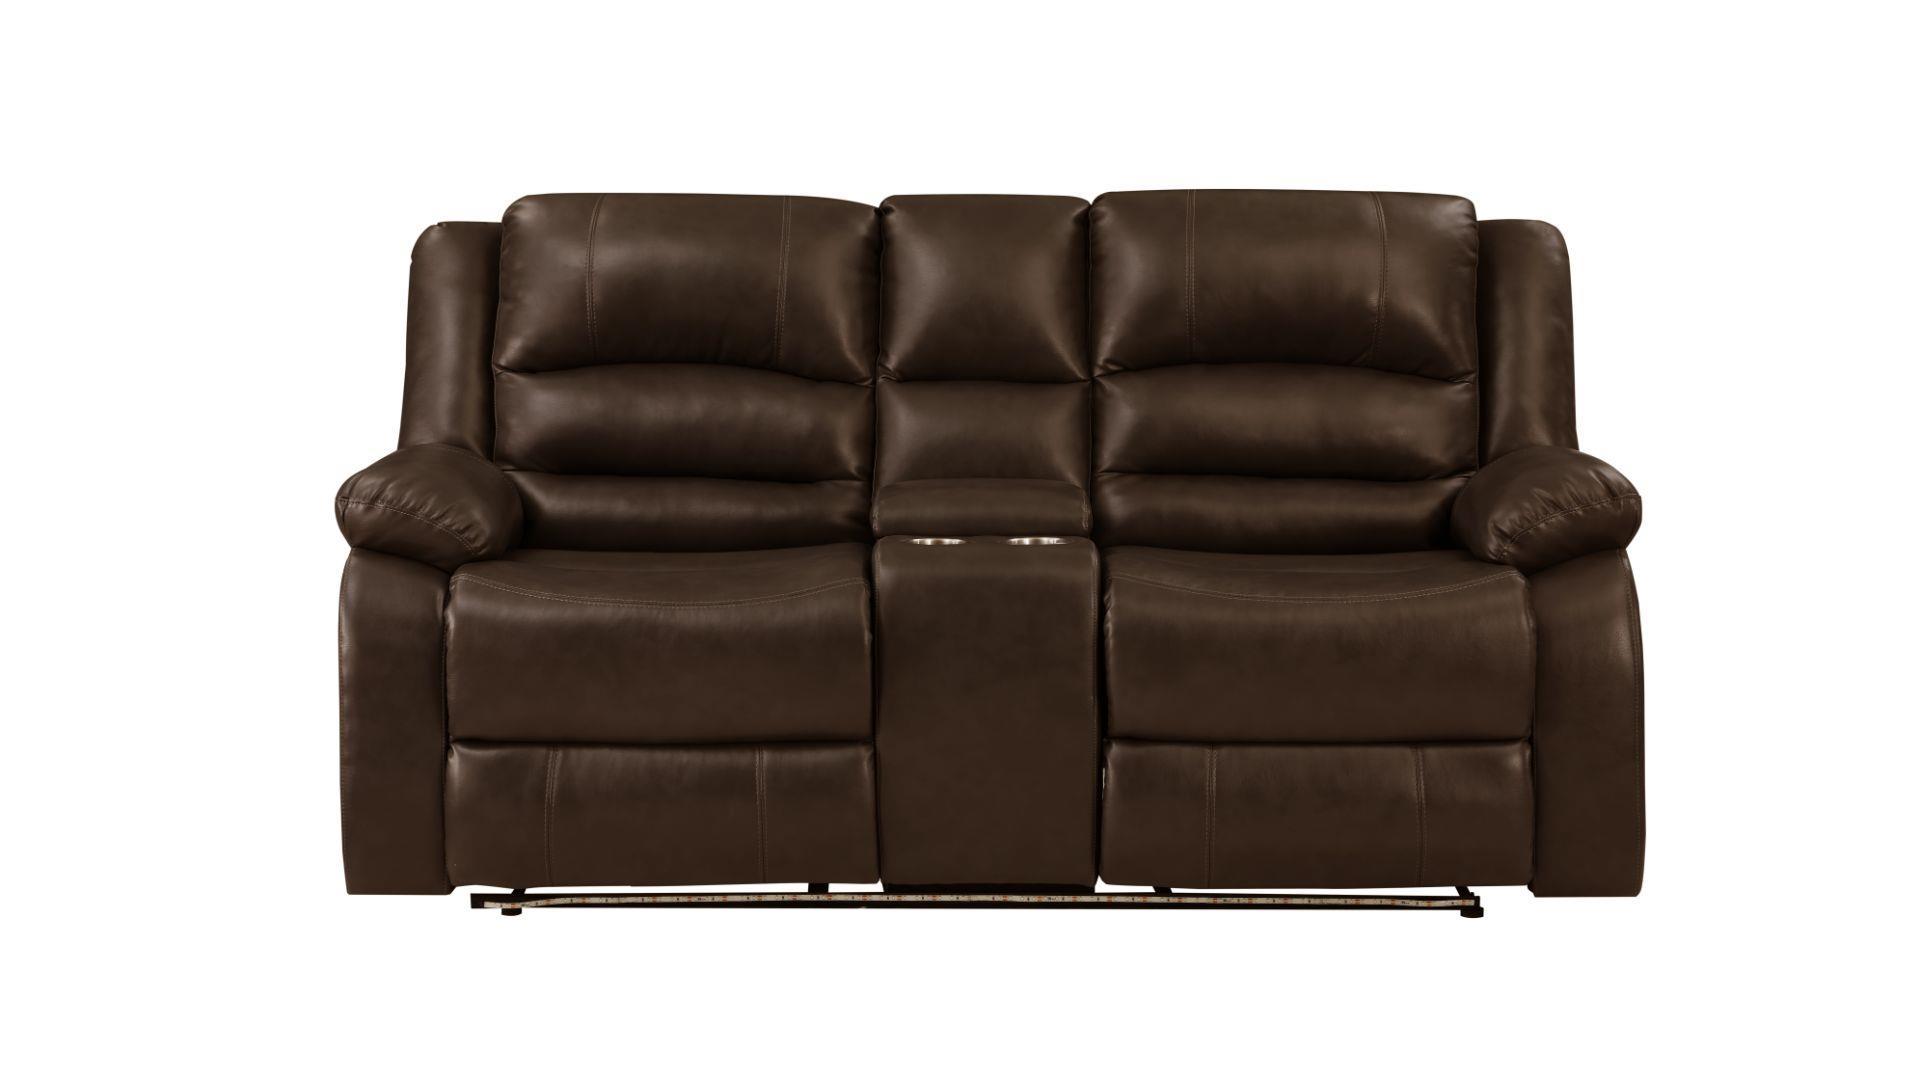 Contemporary, Modern Recliner Loveseat MARTIN BR MARTIN-BR-L in Brown Faux Leather